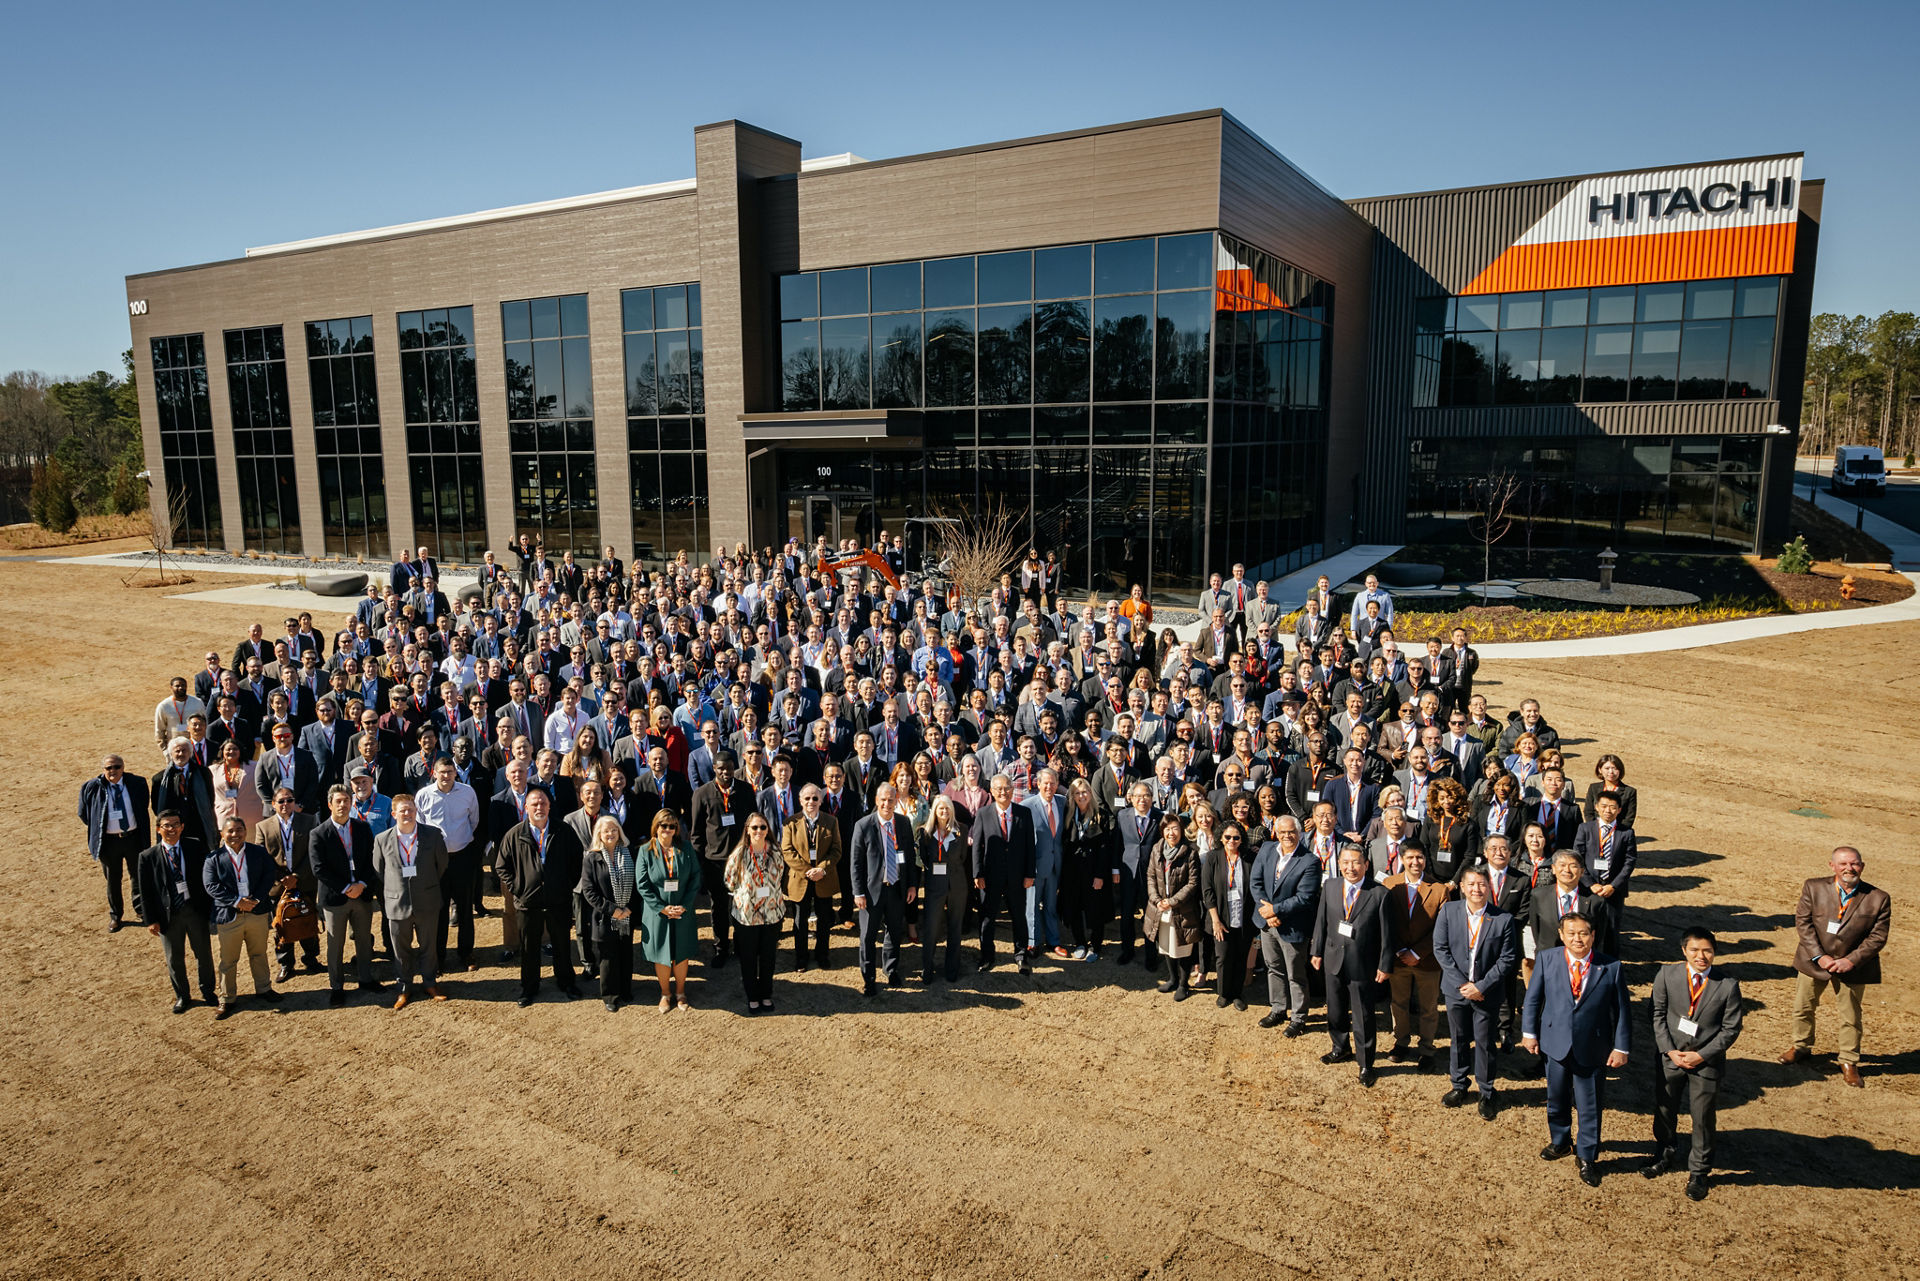 Group photo in front of new headquarters